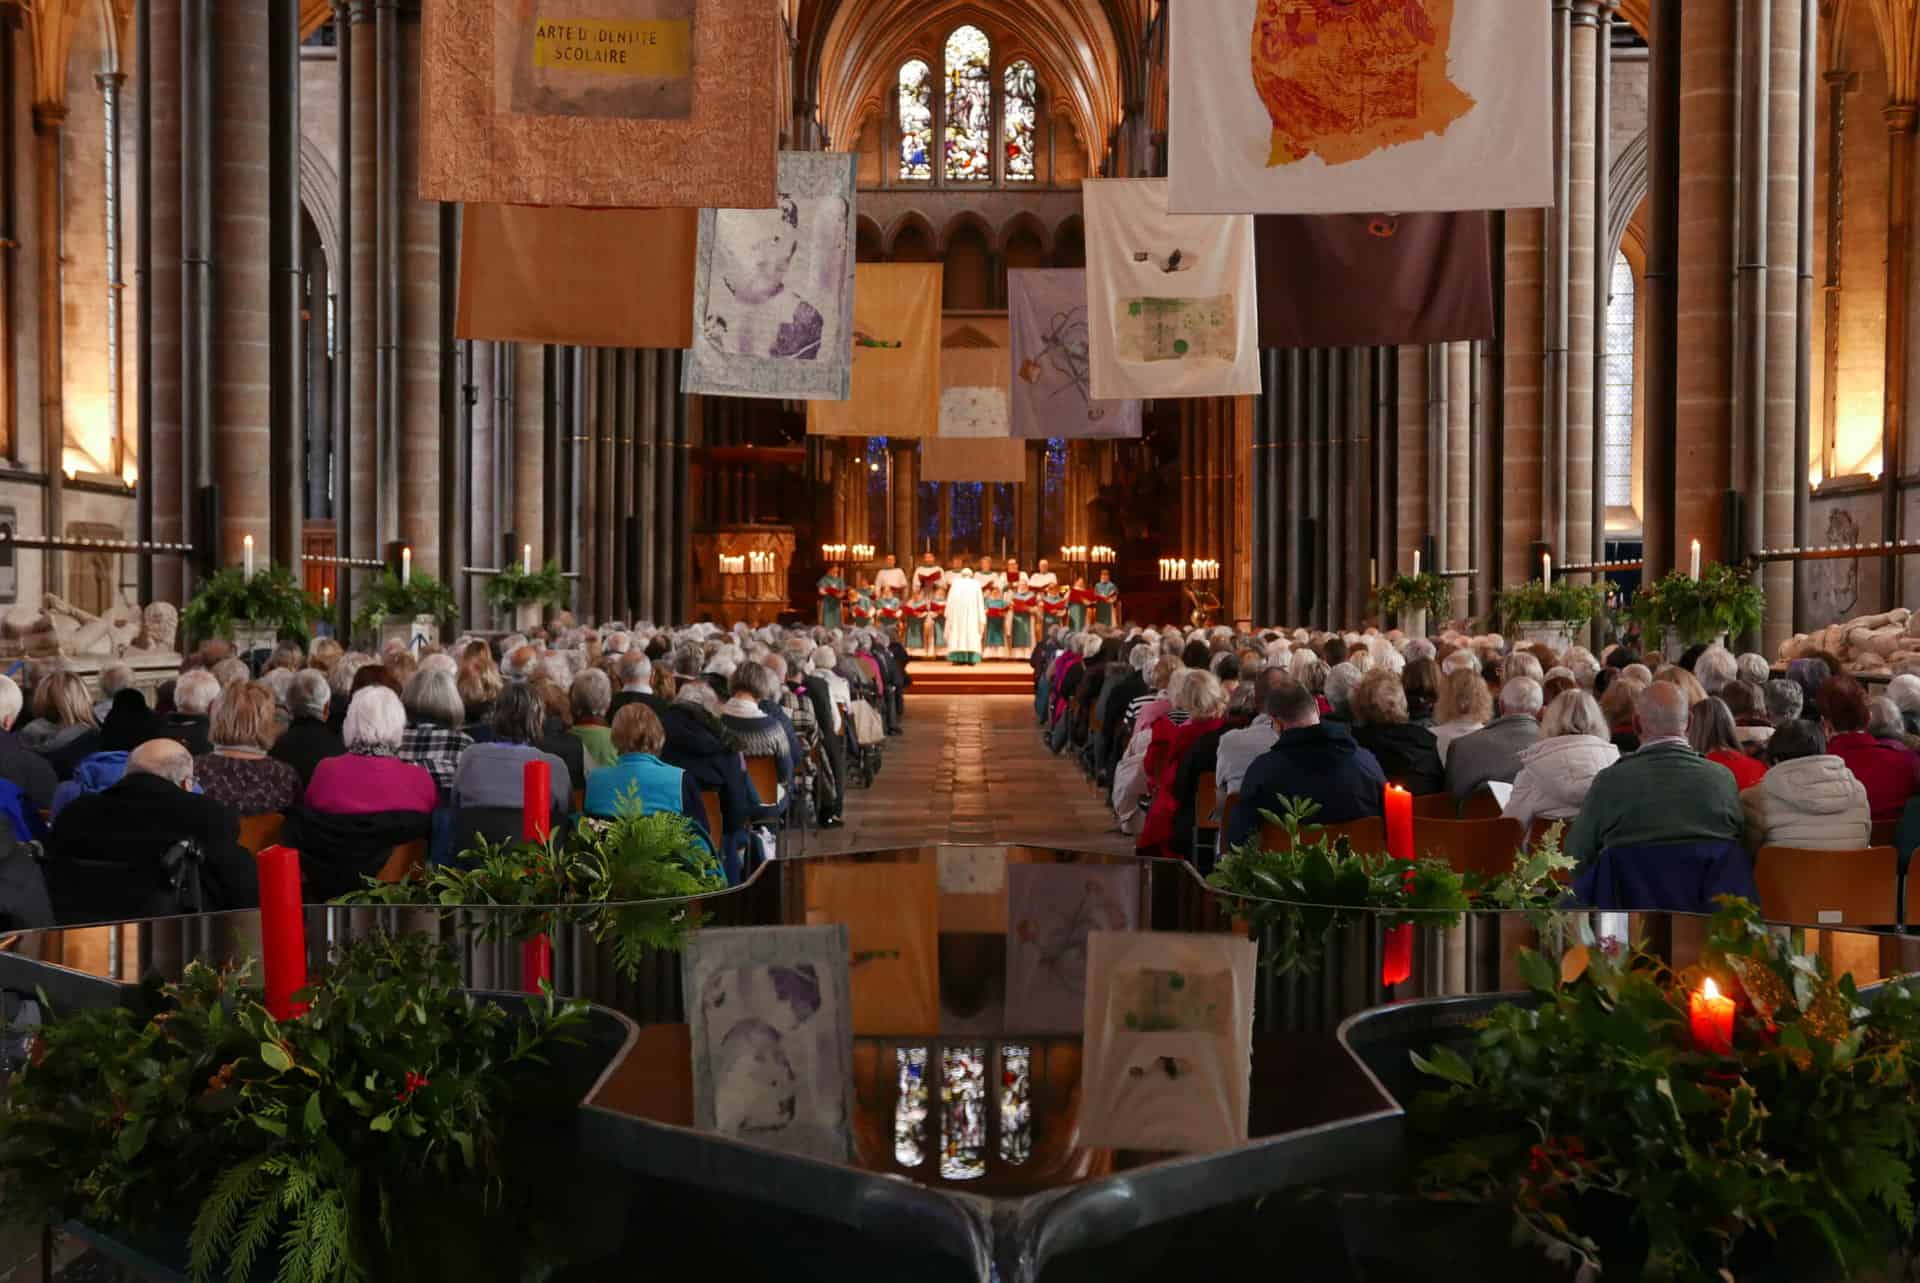 over 500 people attended salisbury cathedral's carol concert for groups photo salisbury cathedral (1)